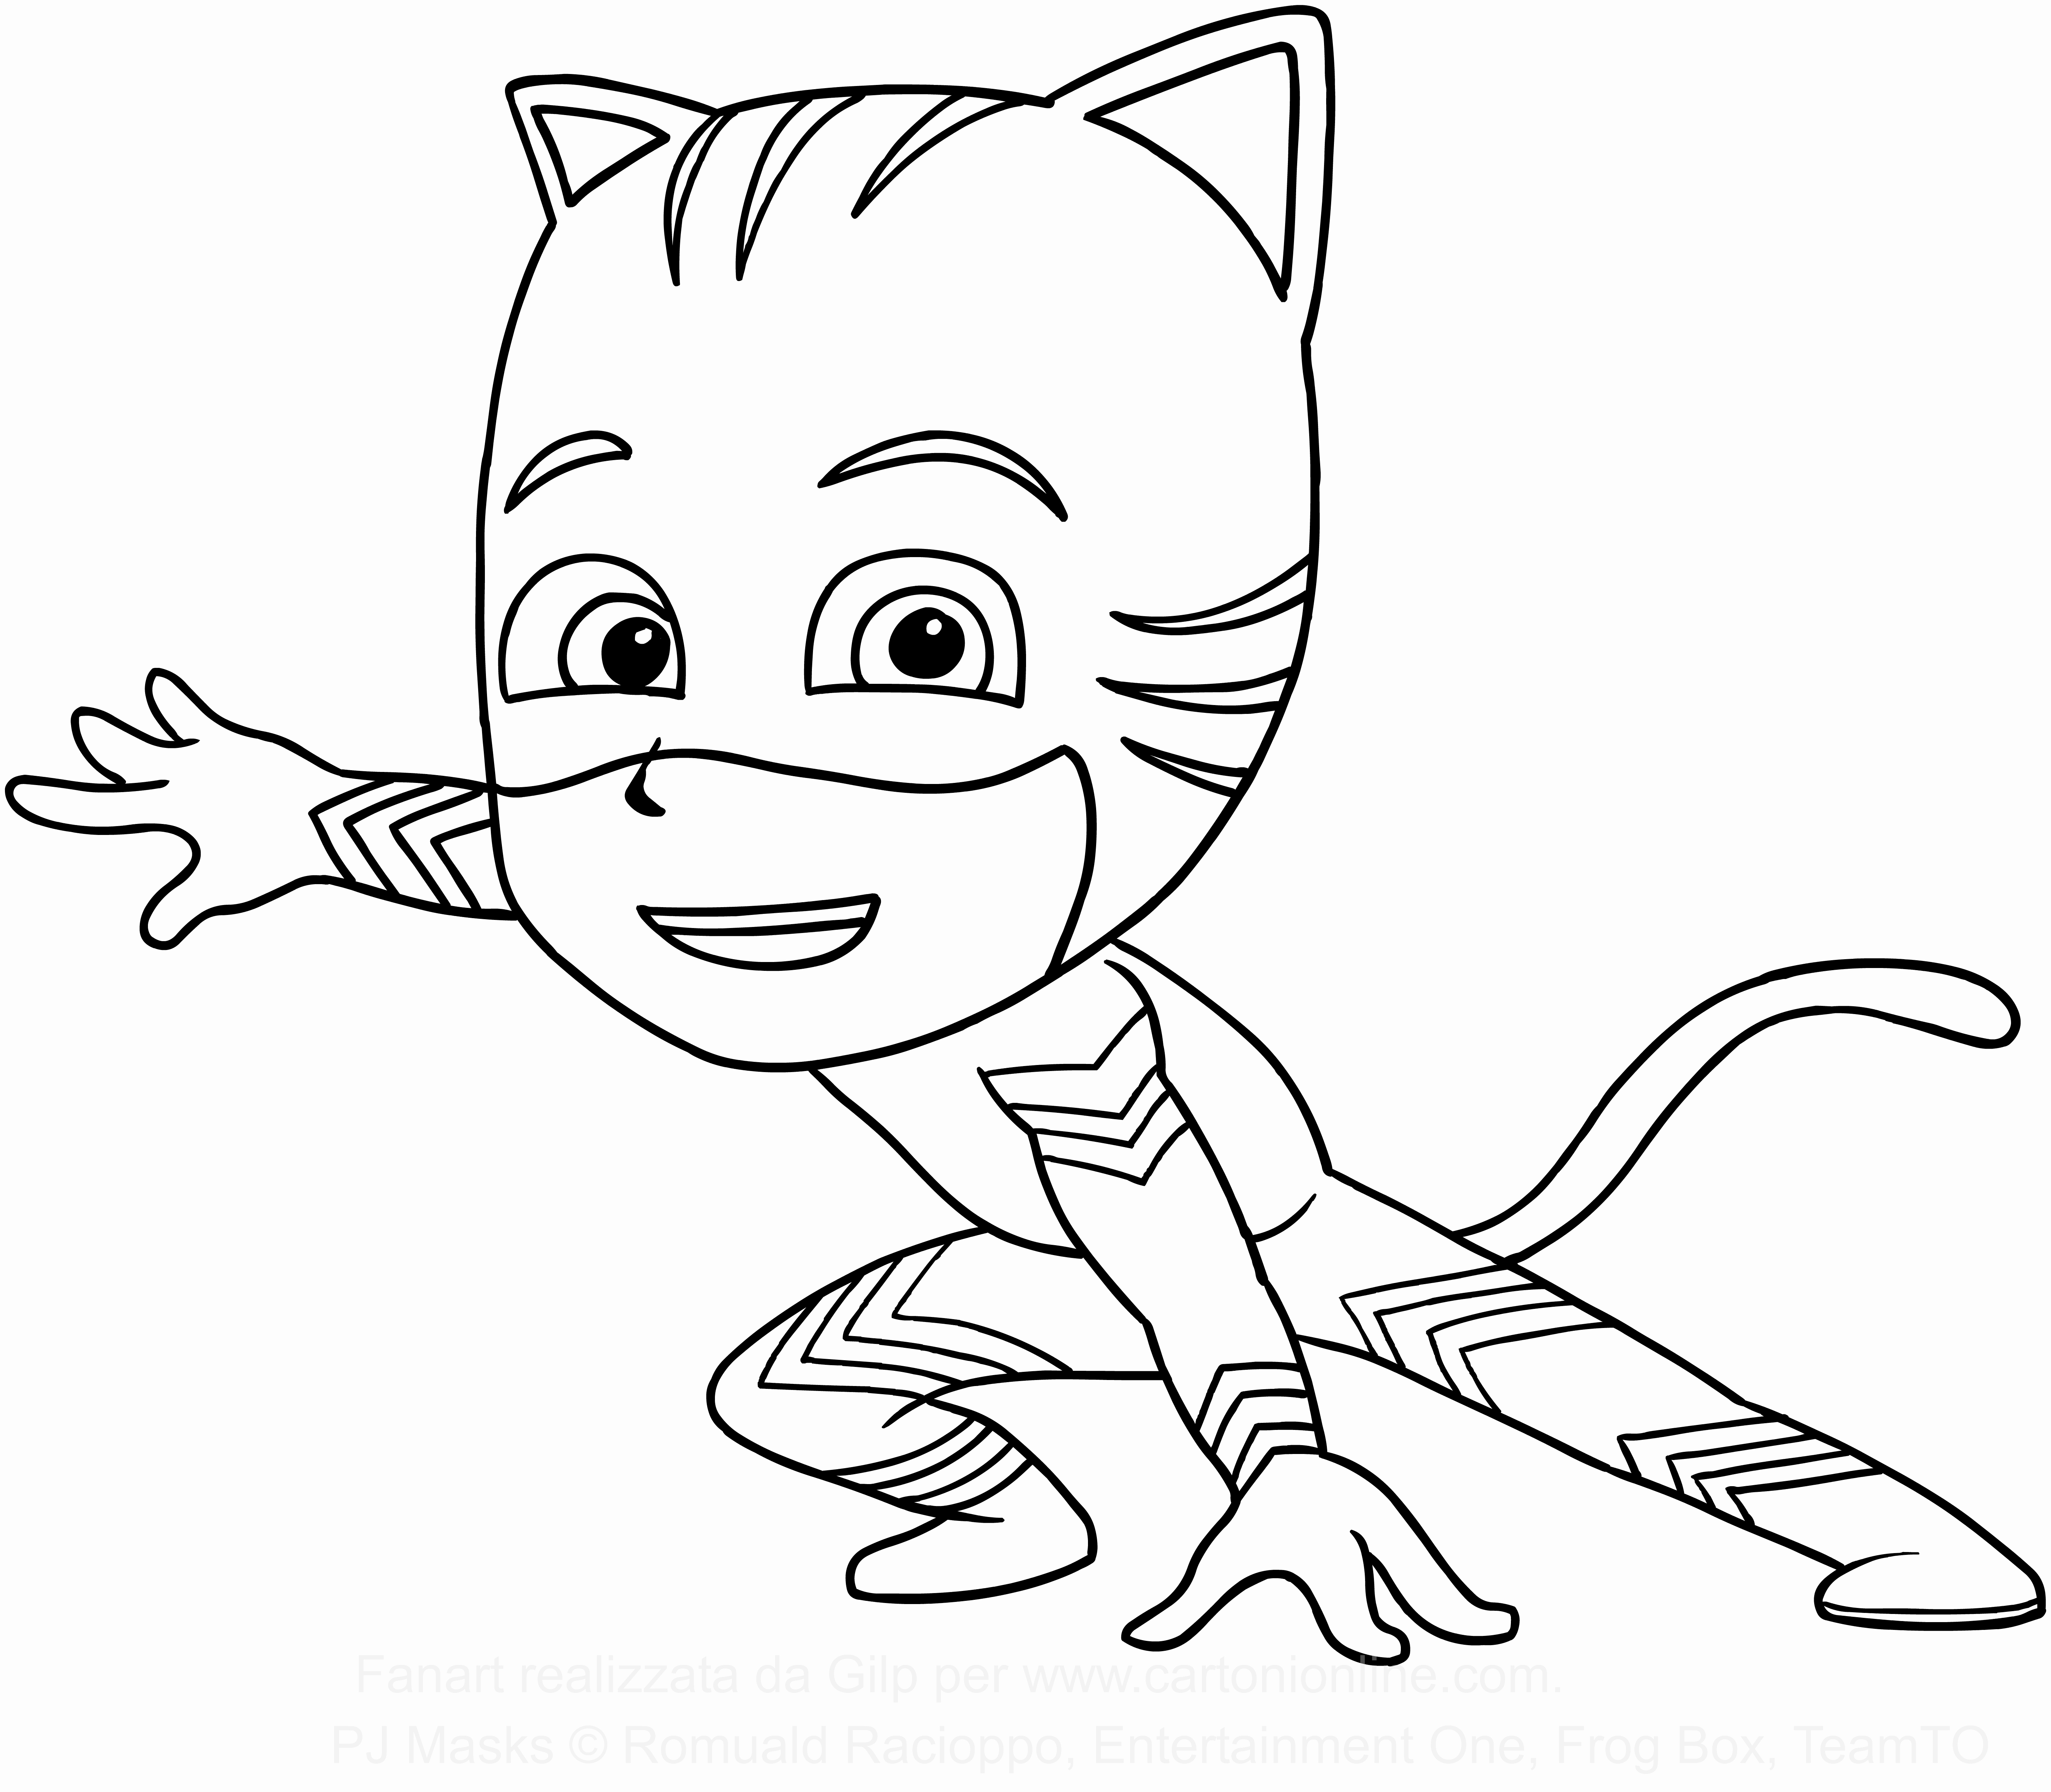 Coloring Pages Of Pj Masks at GetColorings.com | Free ...